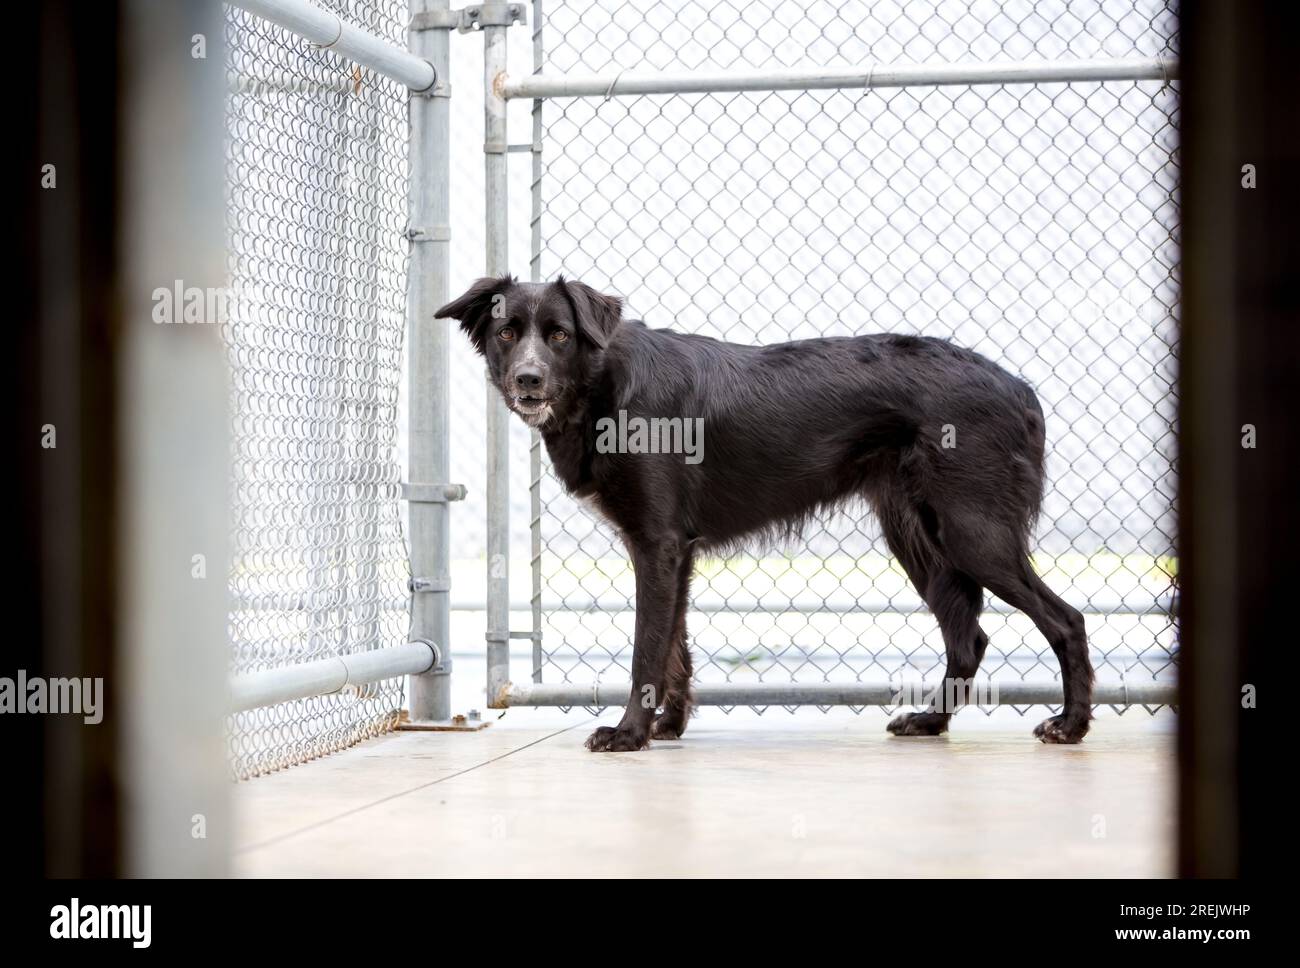 A nervous Border Collie mixed breed dog in an animal shelter kennel Stock Photo